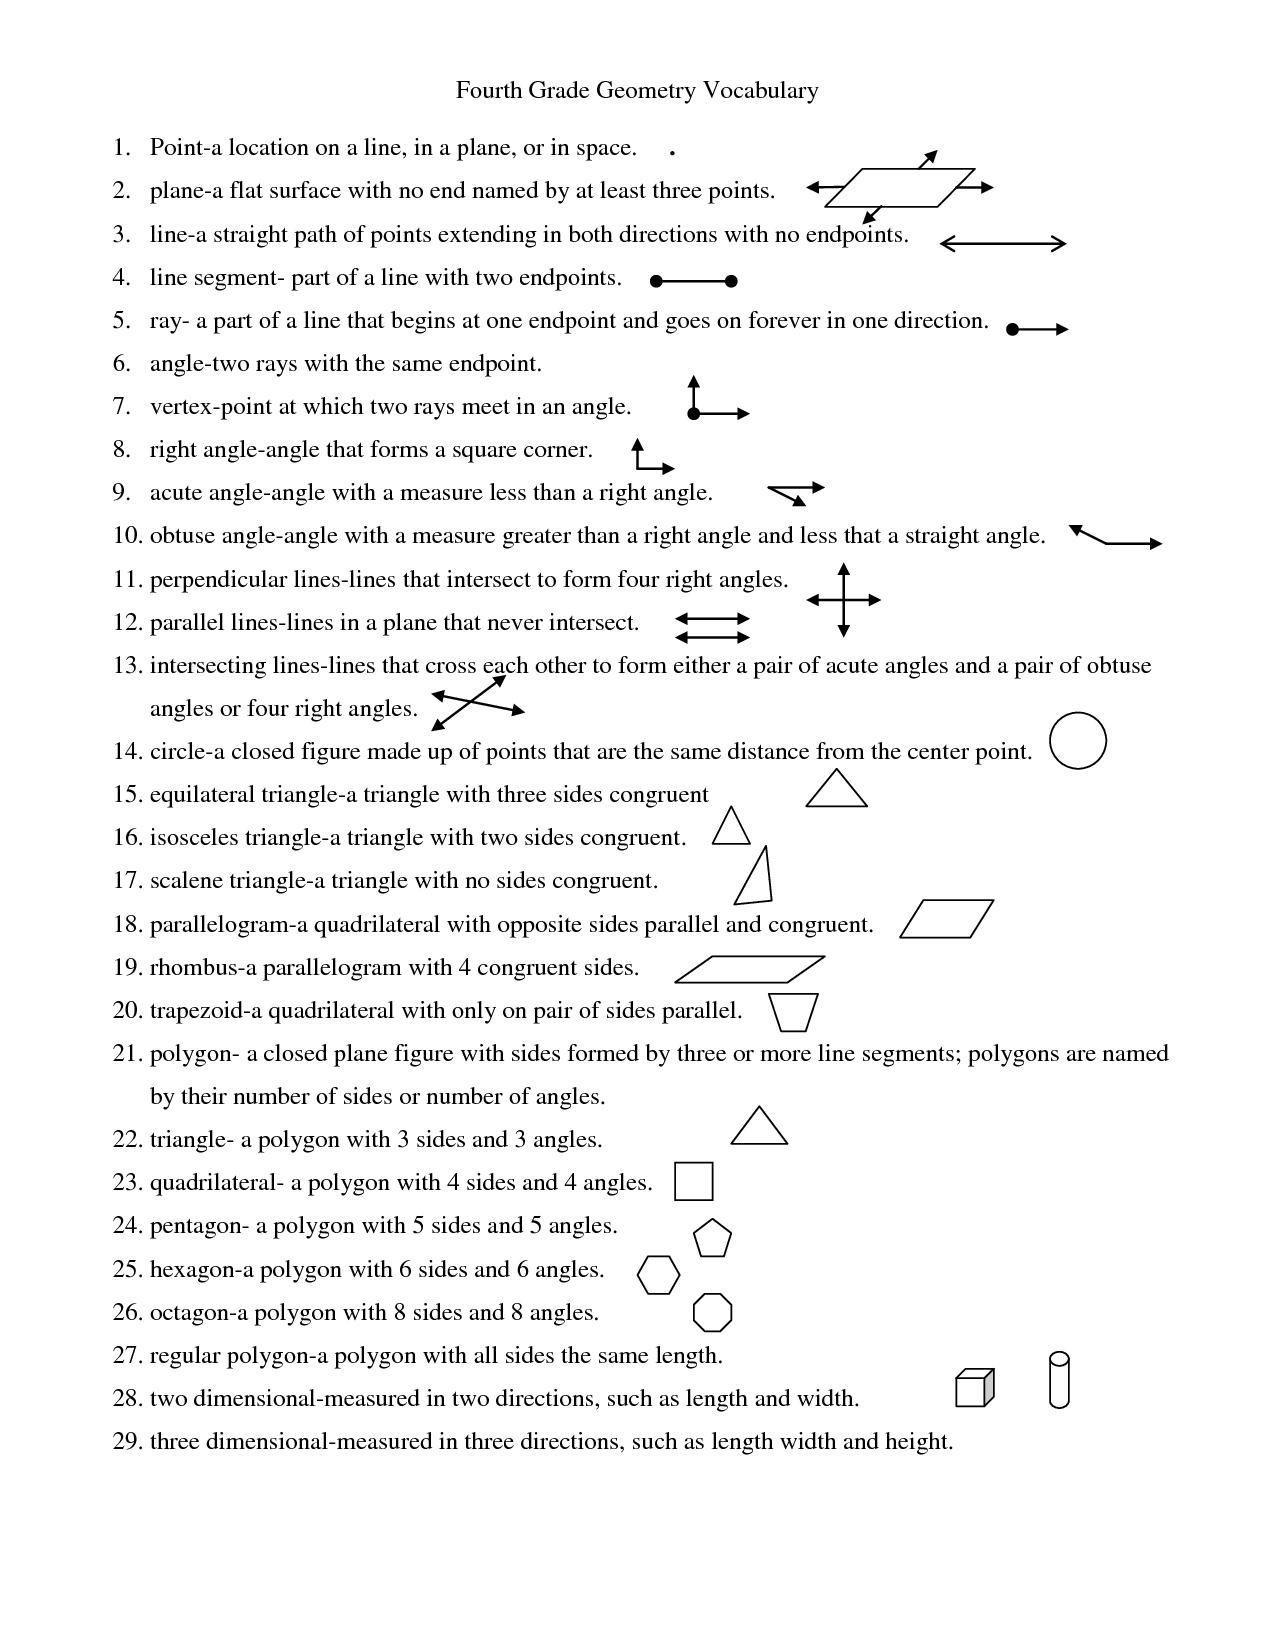 9 Best Images Of Math Vocabulary Matching Worksheet Cause And Effect Worksheets 6th Grade 4th